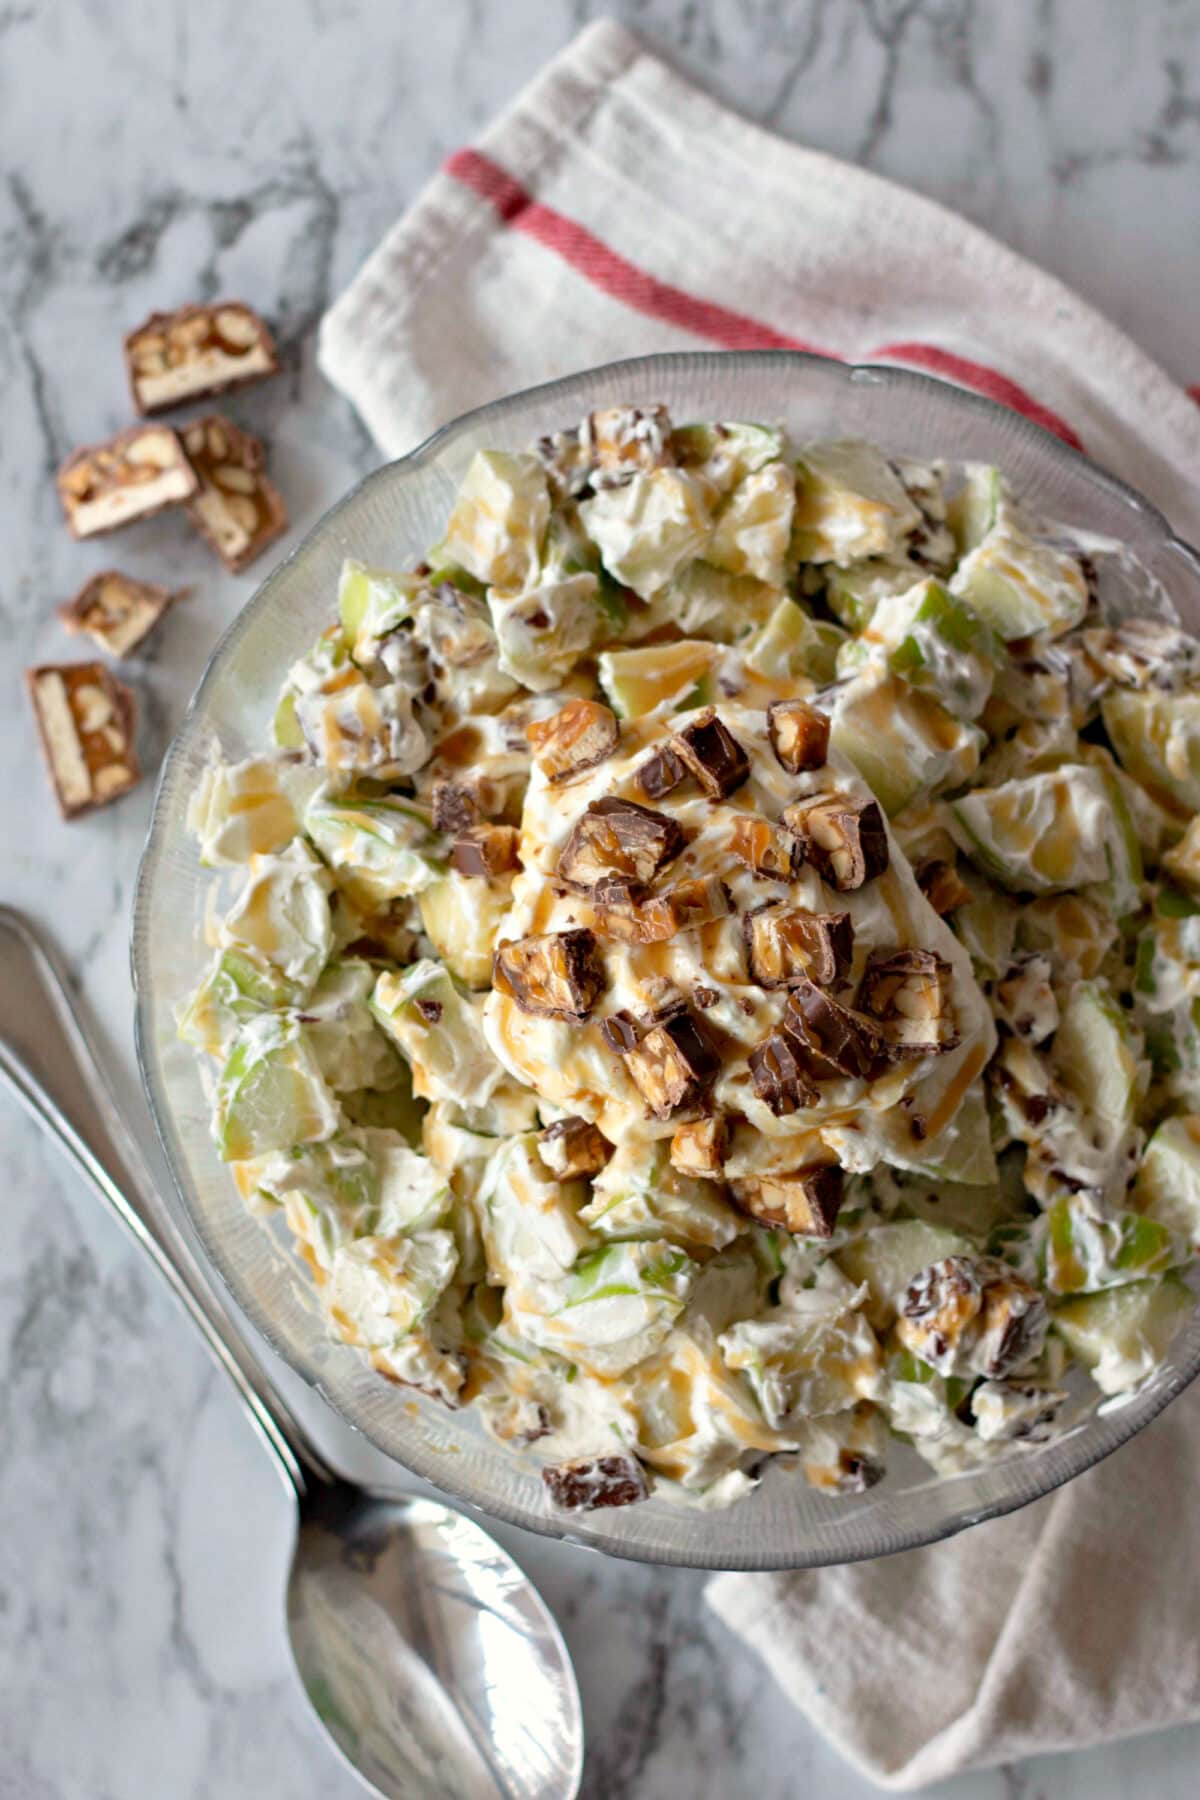 Snickers apple salad in a bowl